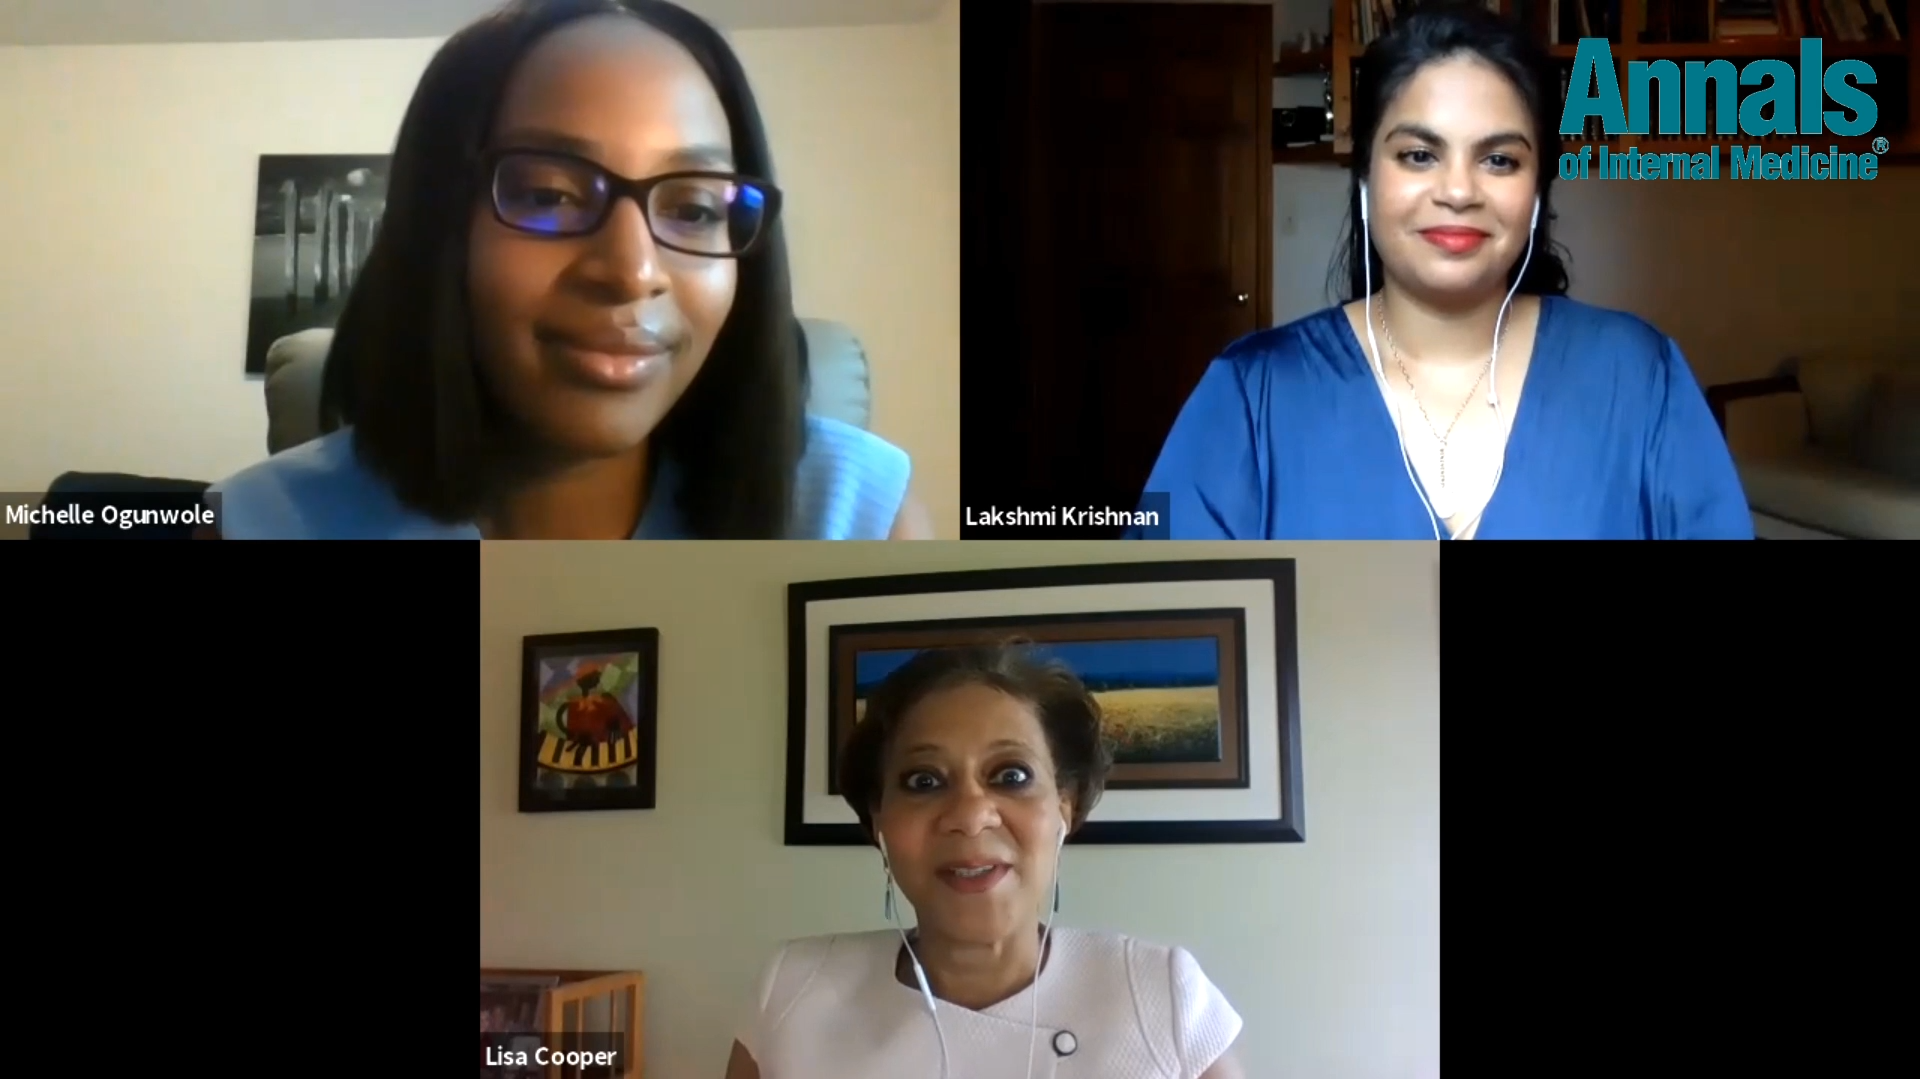 Dr. Lakshmi Krishnan, Dr. S. Michelle Ogunwole and Dr. Lisa A. Cooper in a video presentation of their Annals of Internal Medicine article "Historical Insights on Coronavirus Disease 2019 (COVID-19), the 1918 Influenza Pandemic, and Racial Disparities: Illuminating a Path Forward".